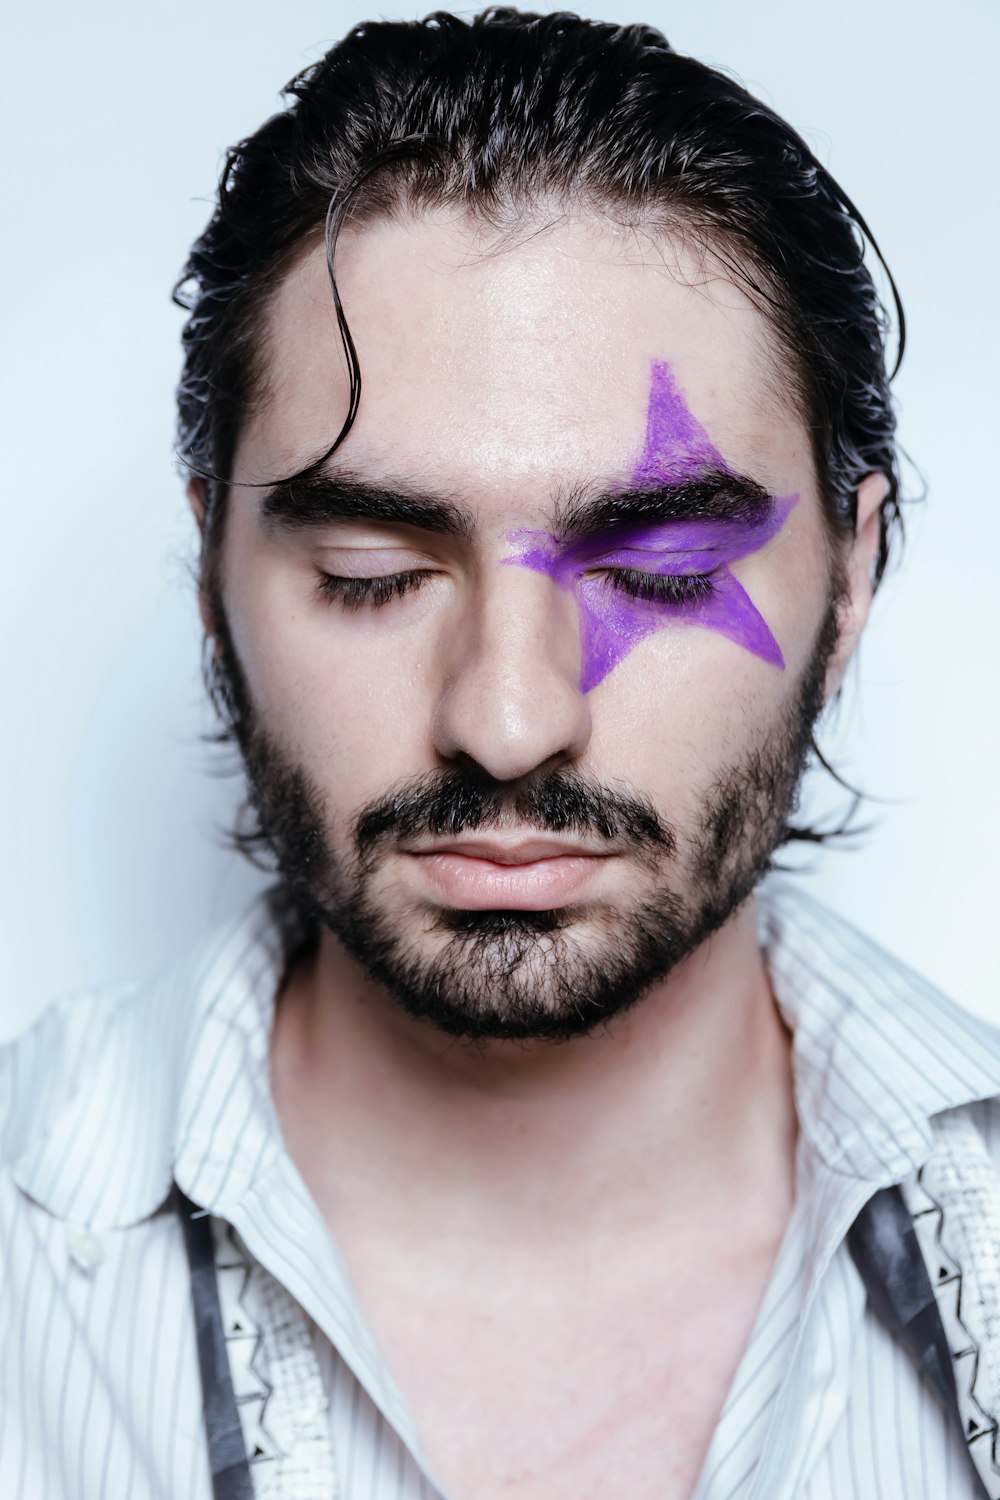 man in white and gray stripe shirt with purple and black eye shadow